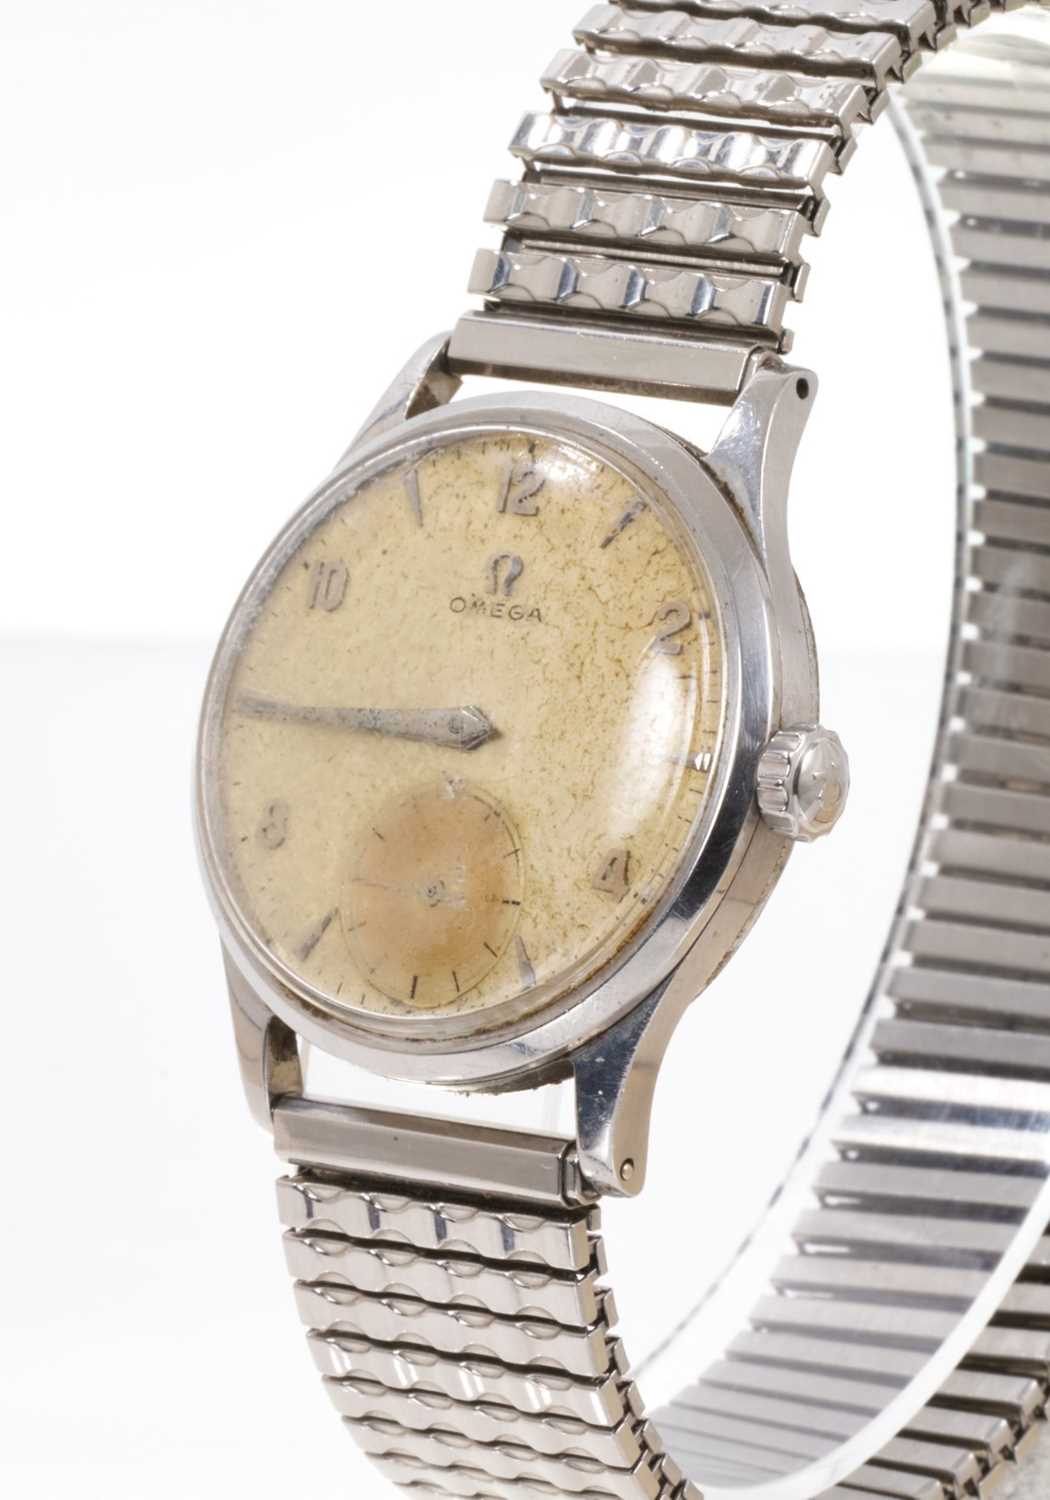 1950s Omega stainless steel wristwatch with manual-wind 266 calibre 17 jewel movement numbered 14210 - Image 2 of 4